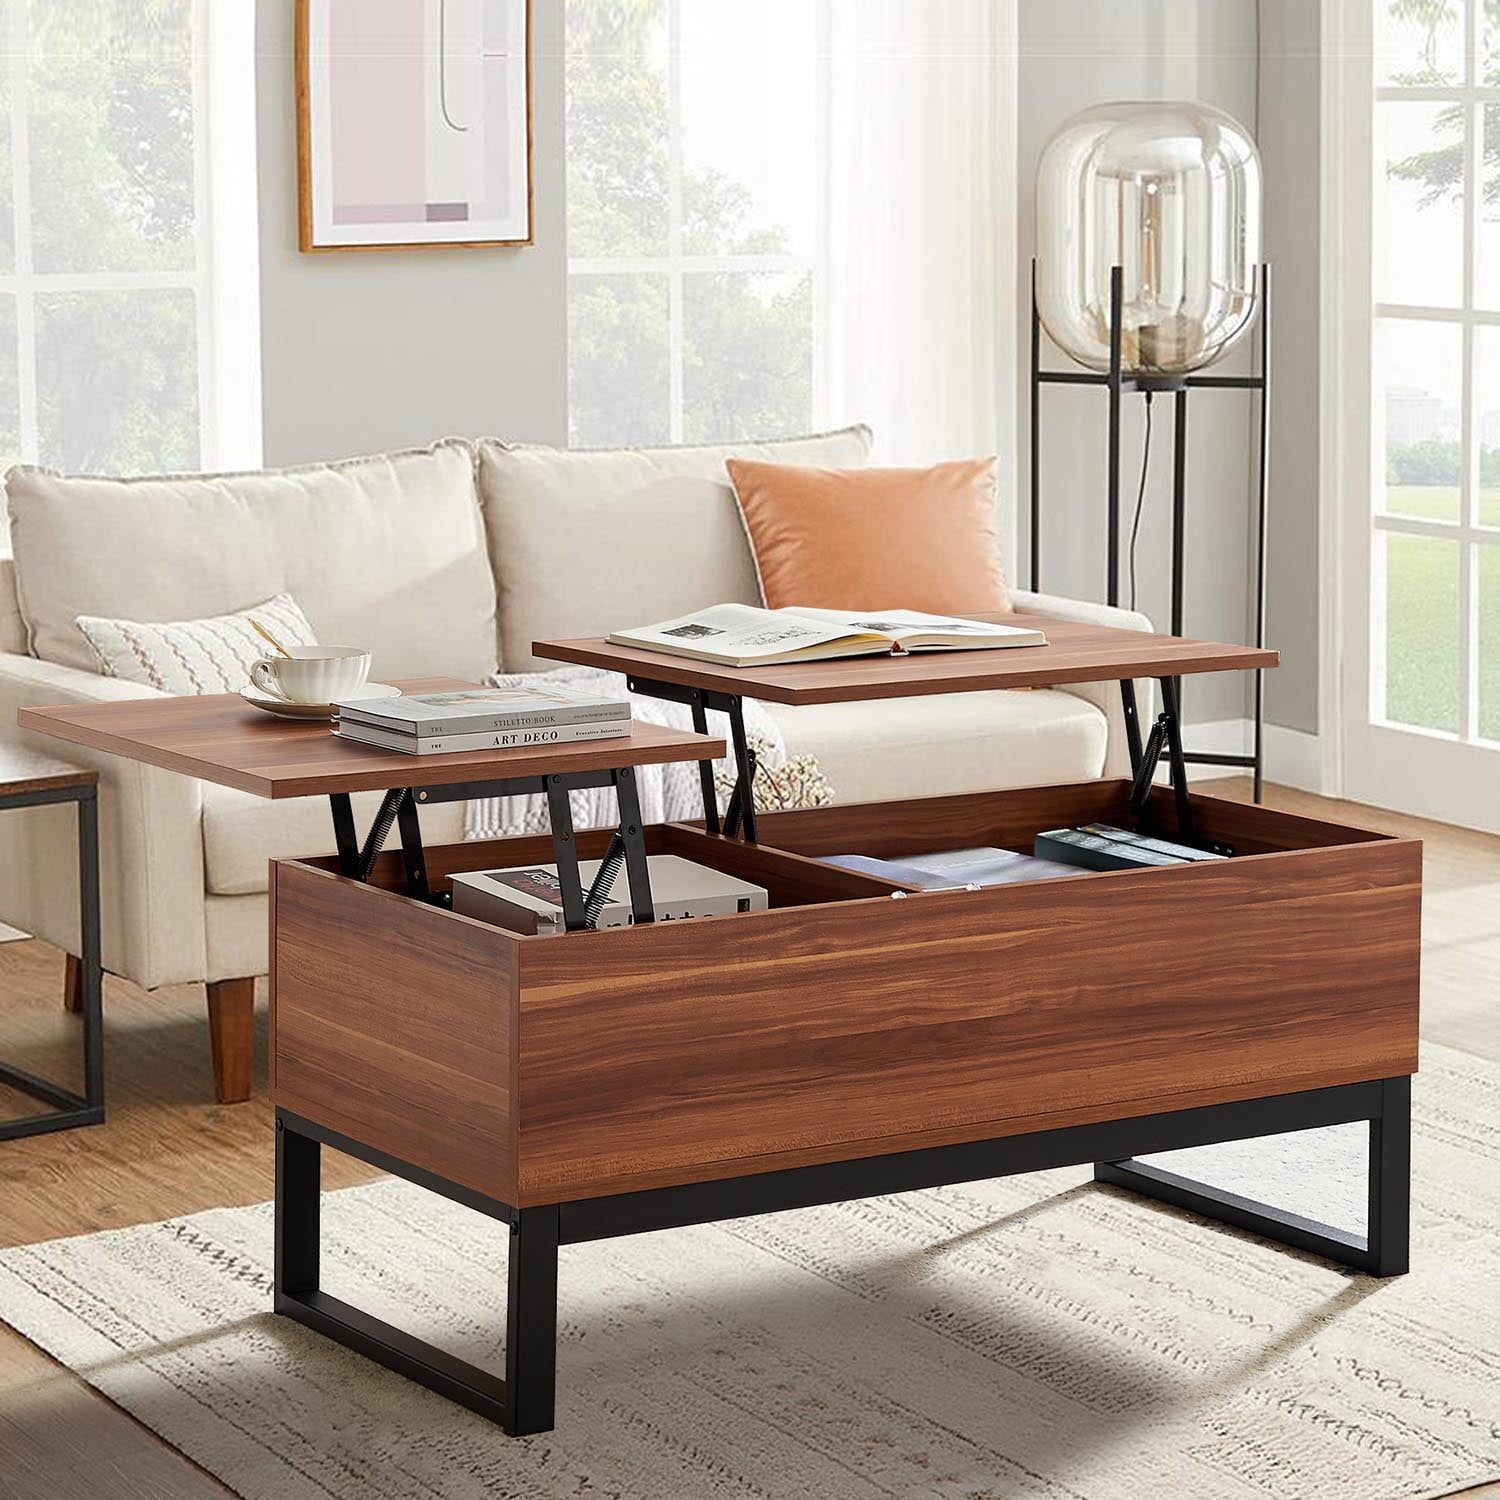 Wood Lift Top Coffee Table With Hidden Compartment, Italy | Ubuy In Lift Top Coffee Tables (Photo 1 of 15)